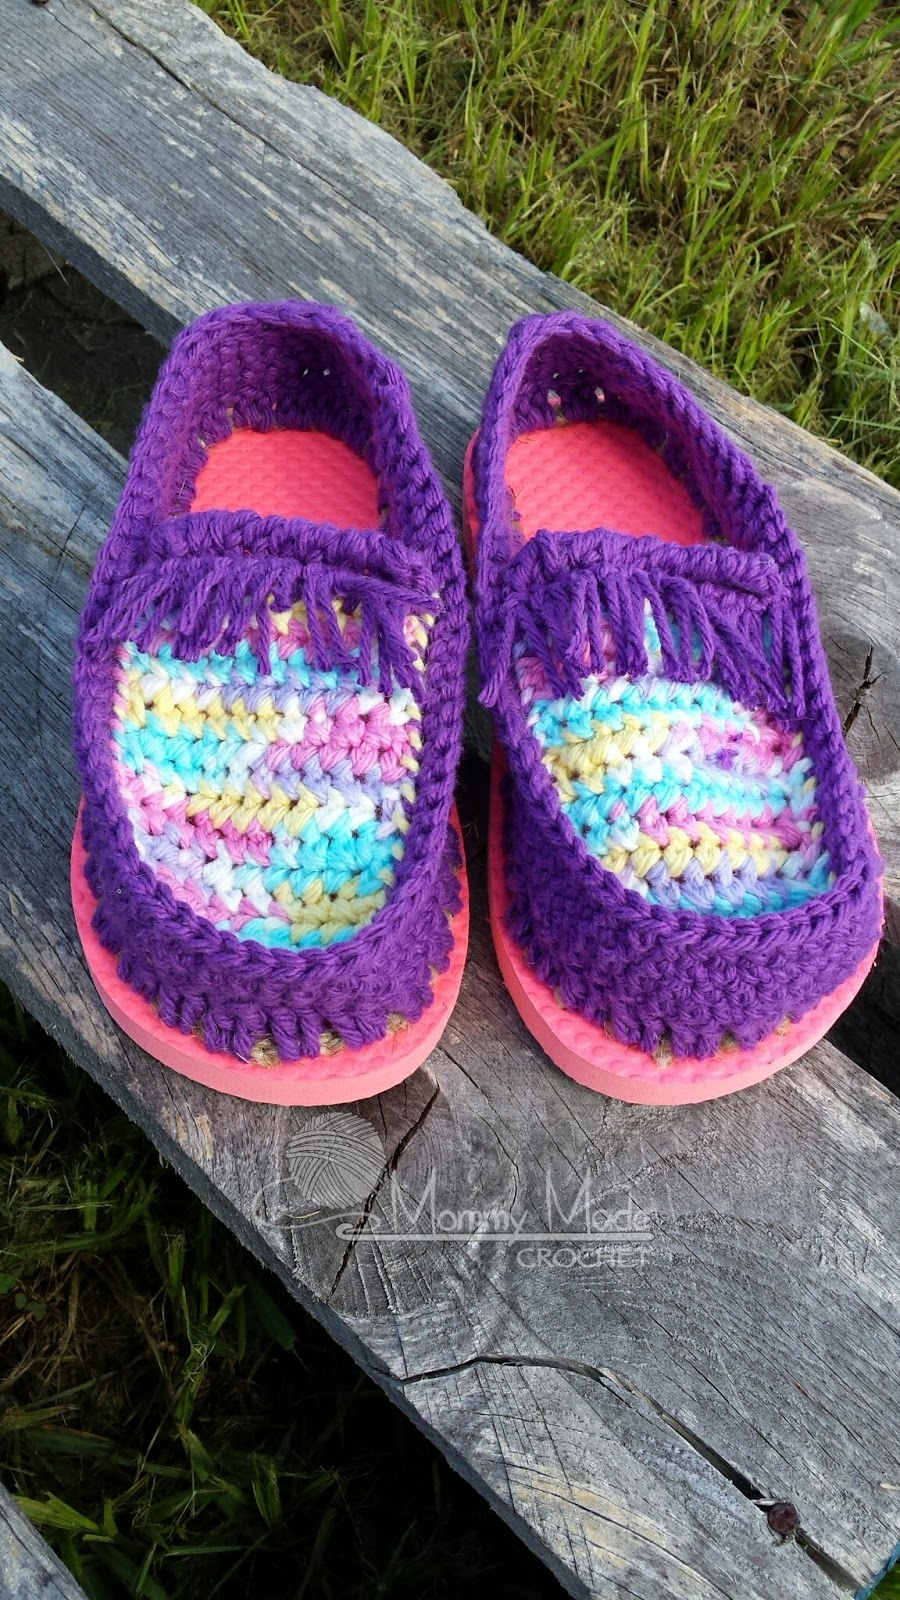 Moccasin Crochet Pattern Mommy Made Crochet Cotton Moccasin Shoes With Flip Flop Soles